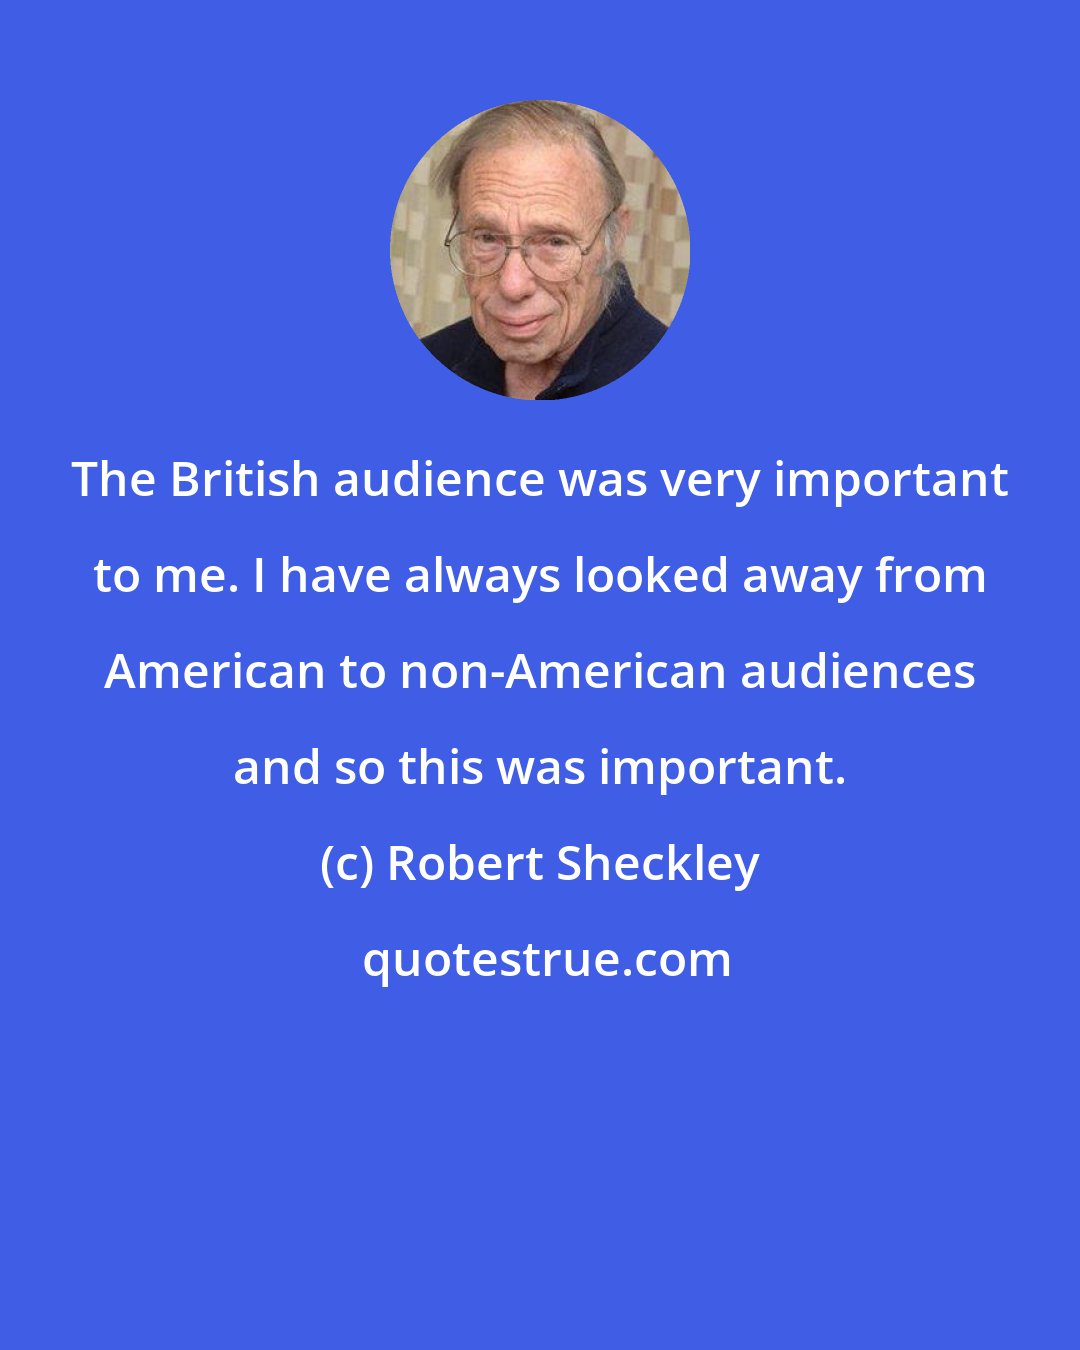 Robert Sheckley: The British audience was very important to me. I have always looked away from American to non-American audiences and so this was important.